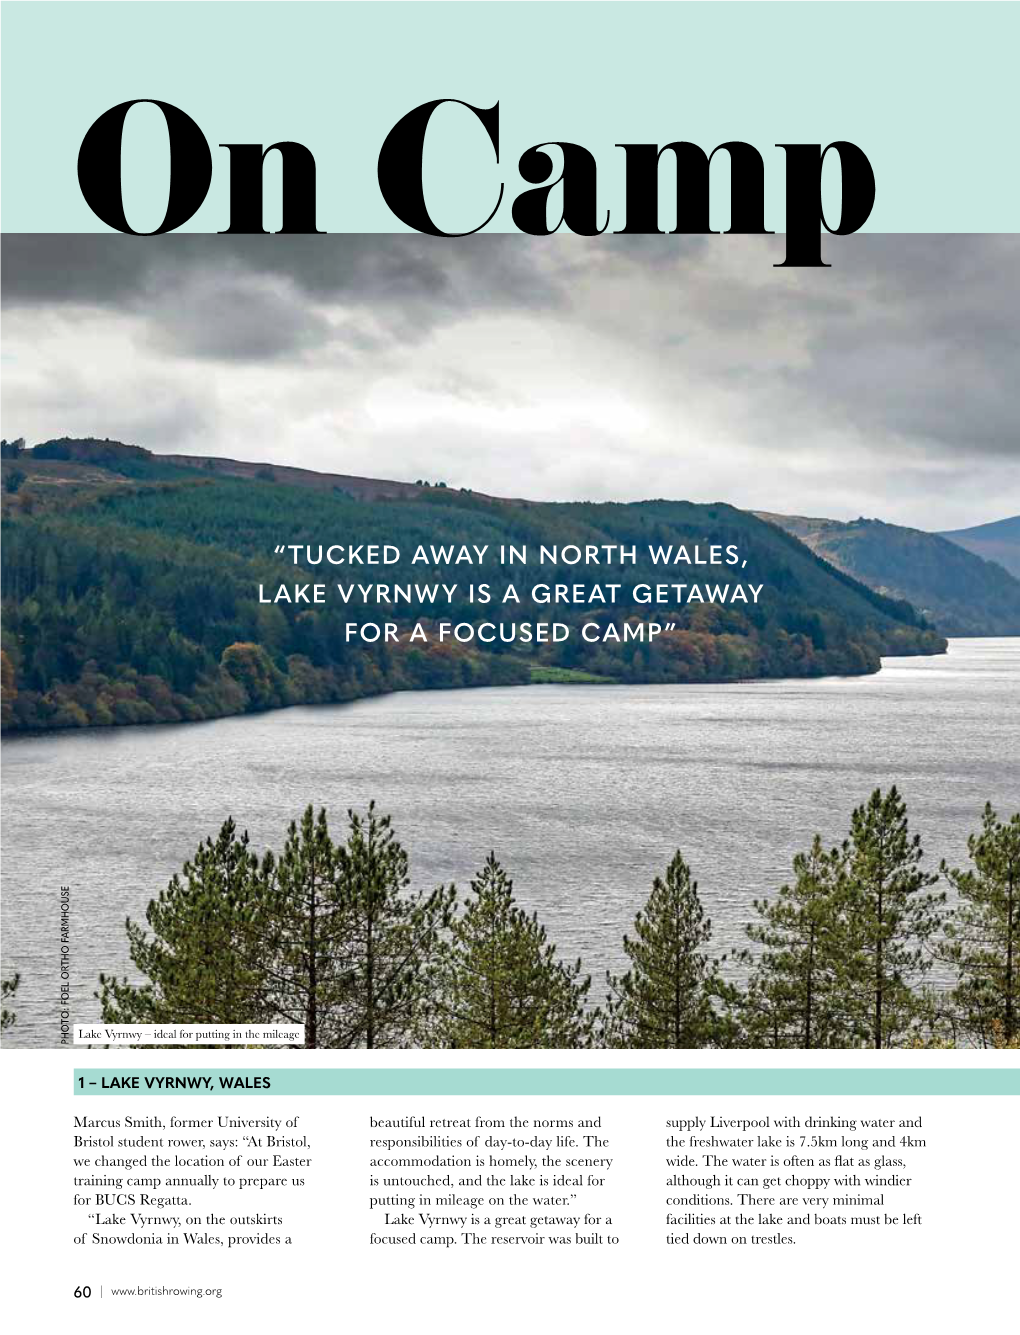 “Tucked Away in North Wales, Lake Vyrnwy Is a Great Getaway for a Focused Camp”